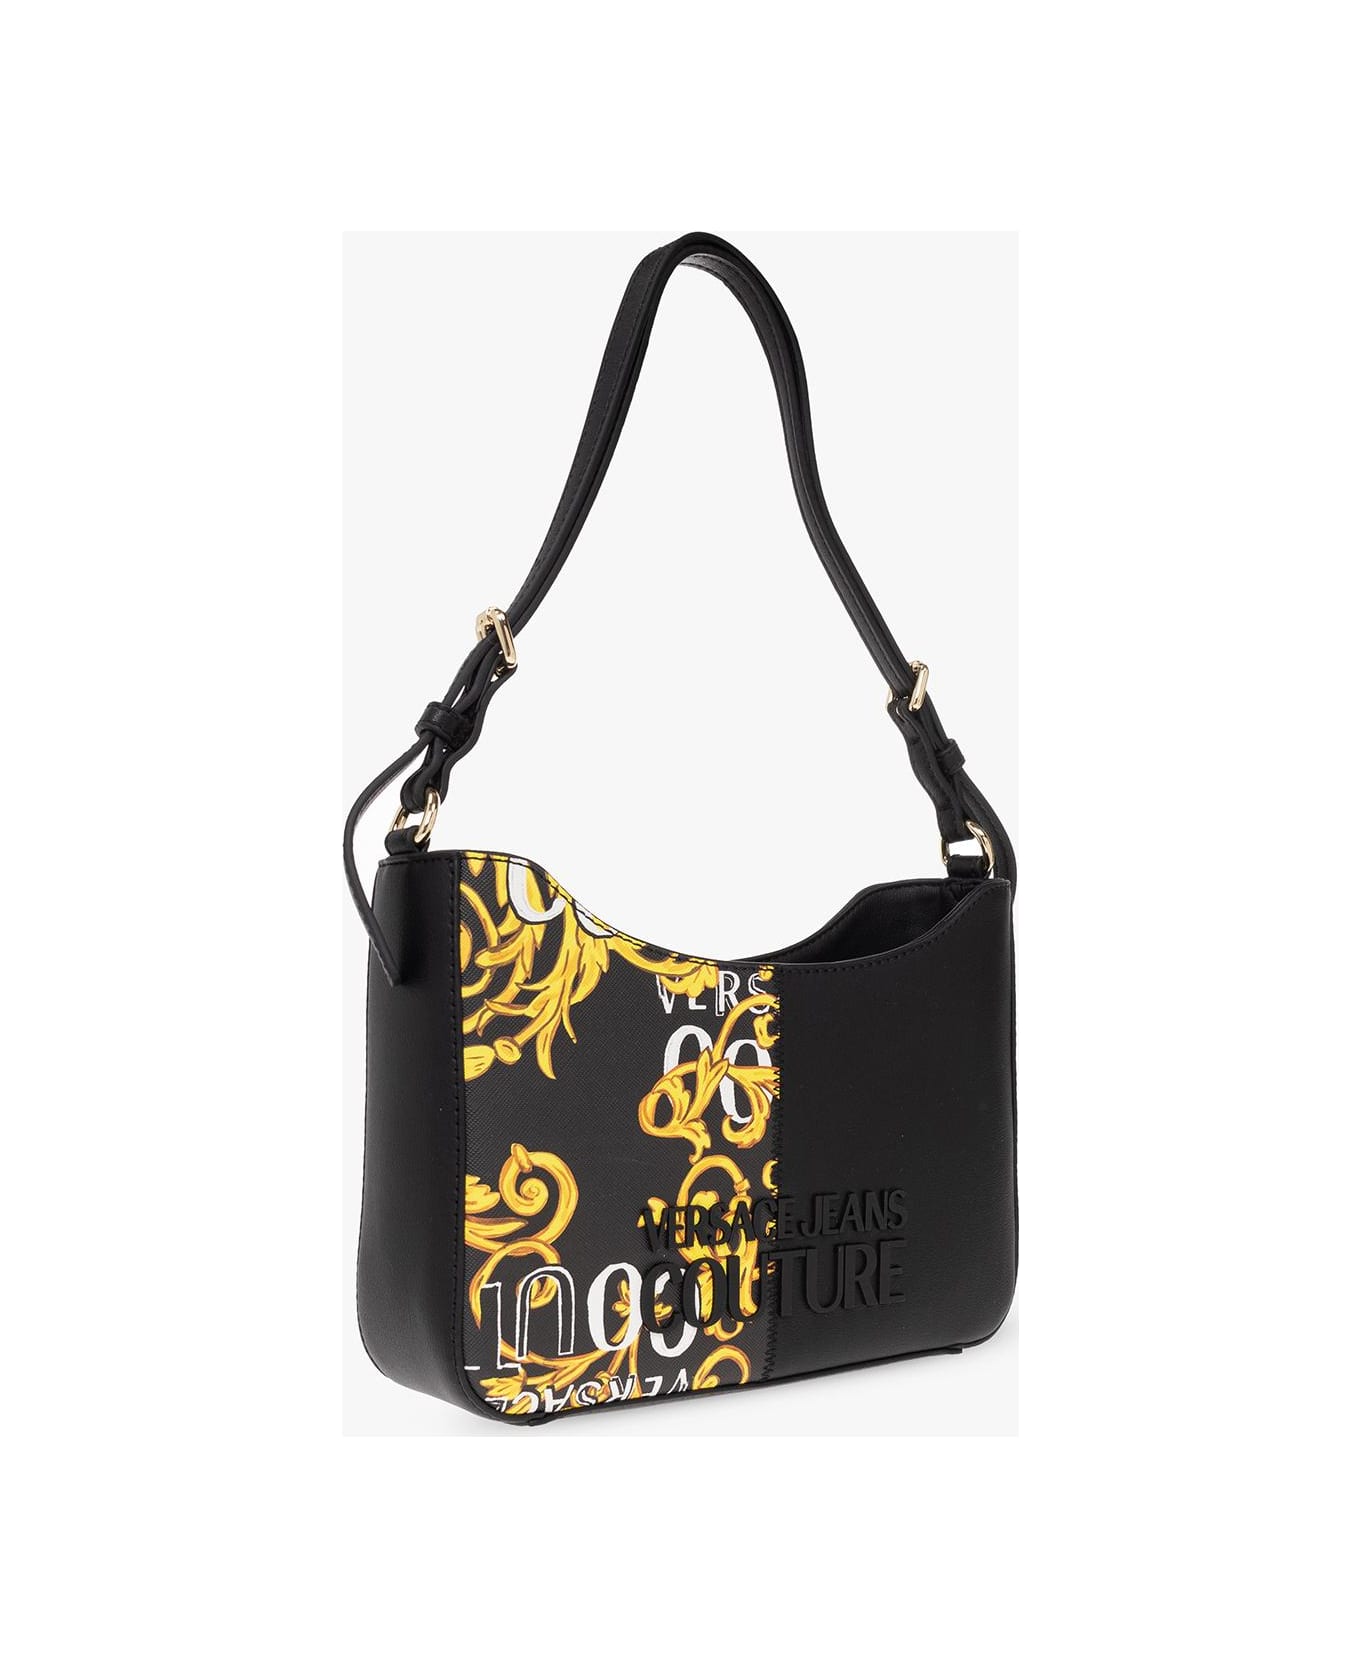 Versace Jeans Couture Bag - BLACK/GOLD トートバッグ